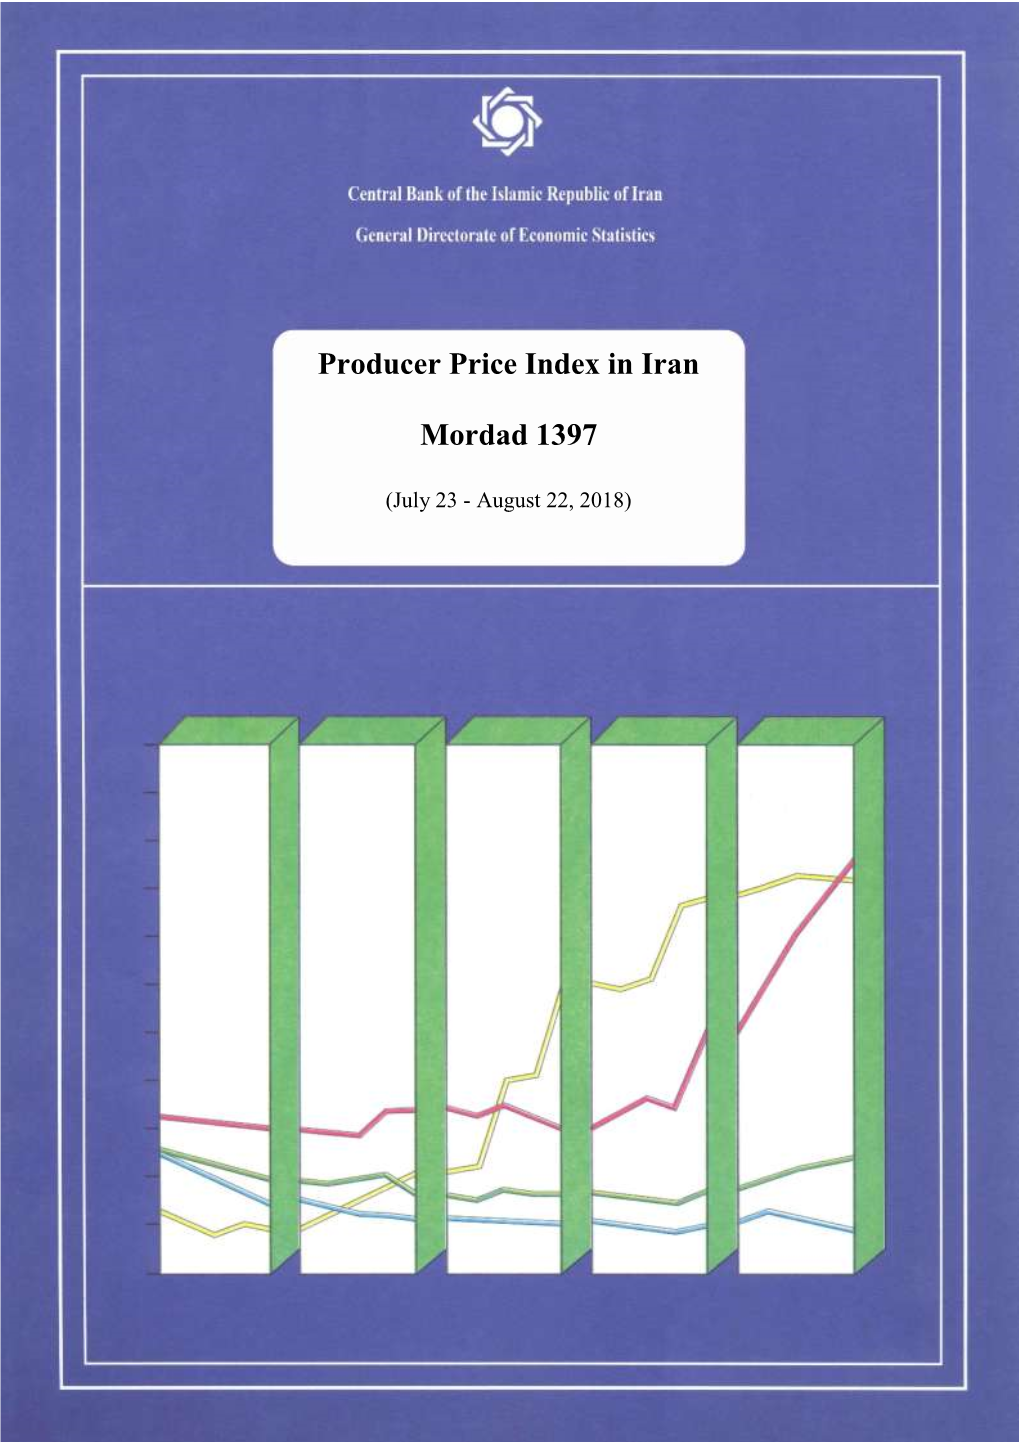 Producer Price Index in Iran Mordad 1397 (July 23 - August 22, 2018)